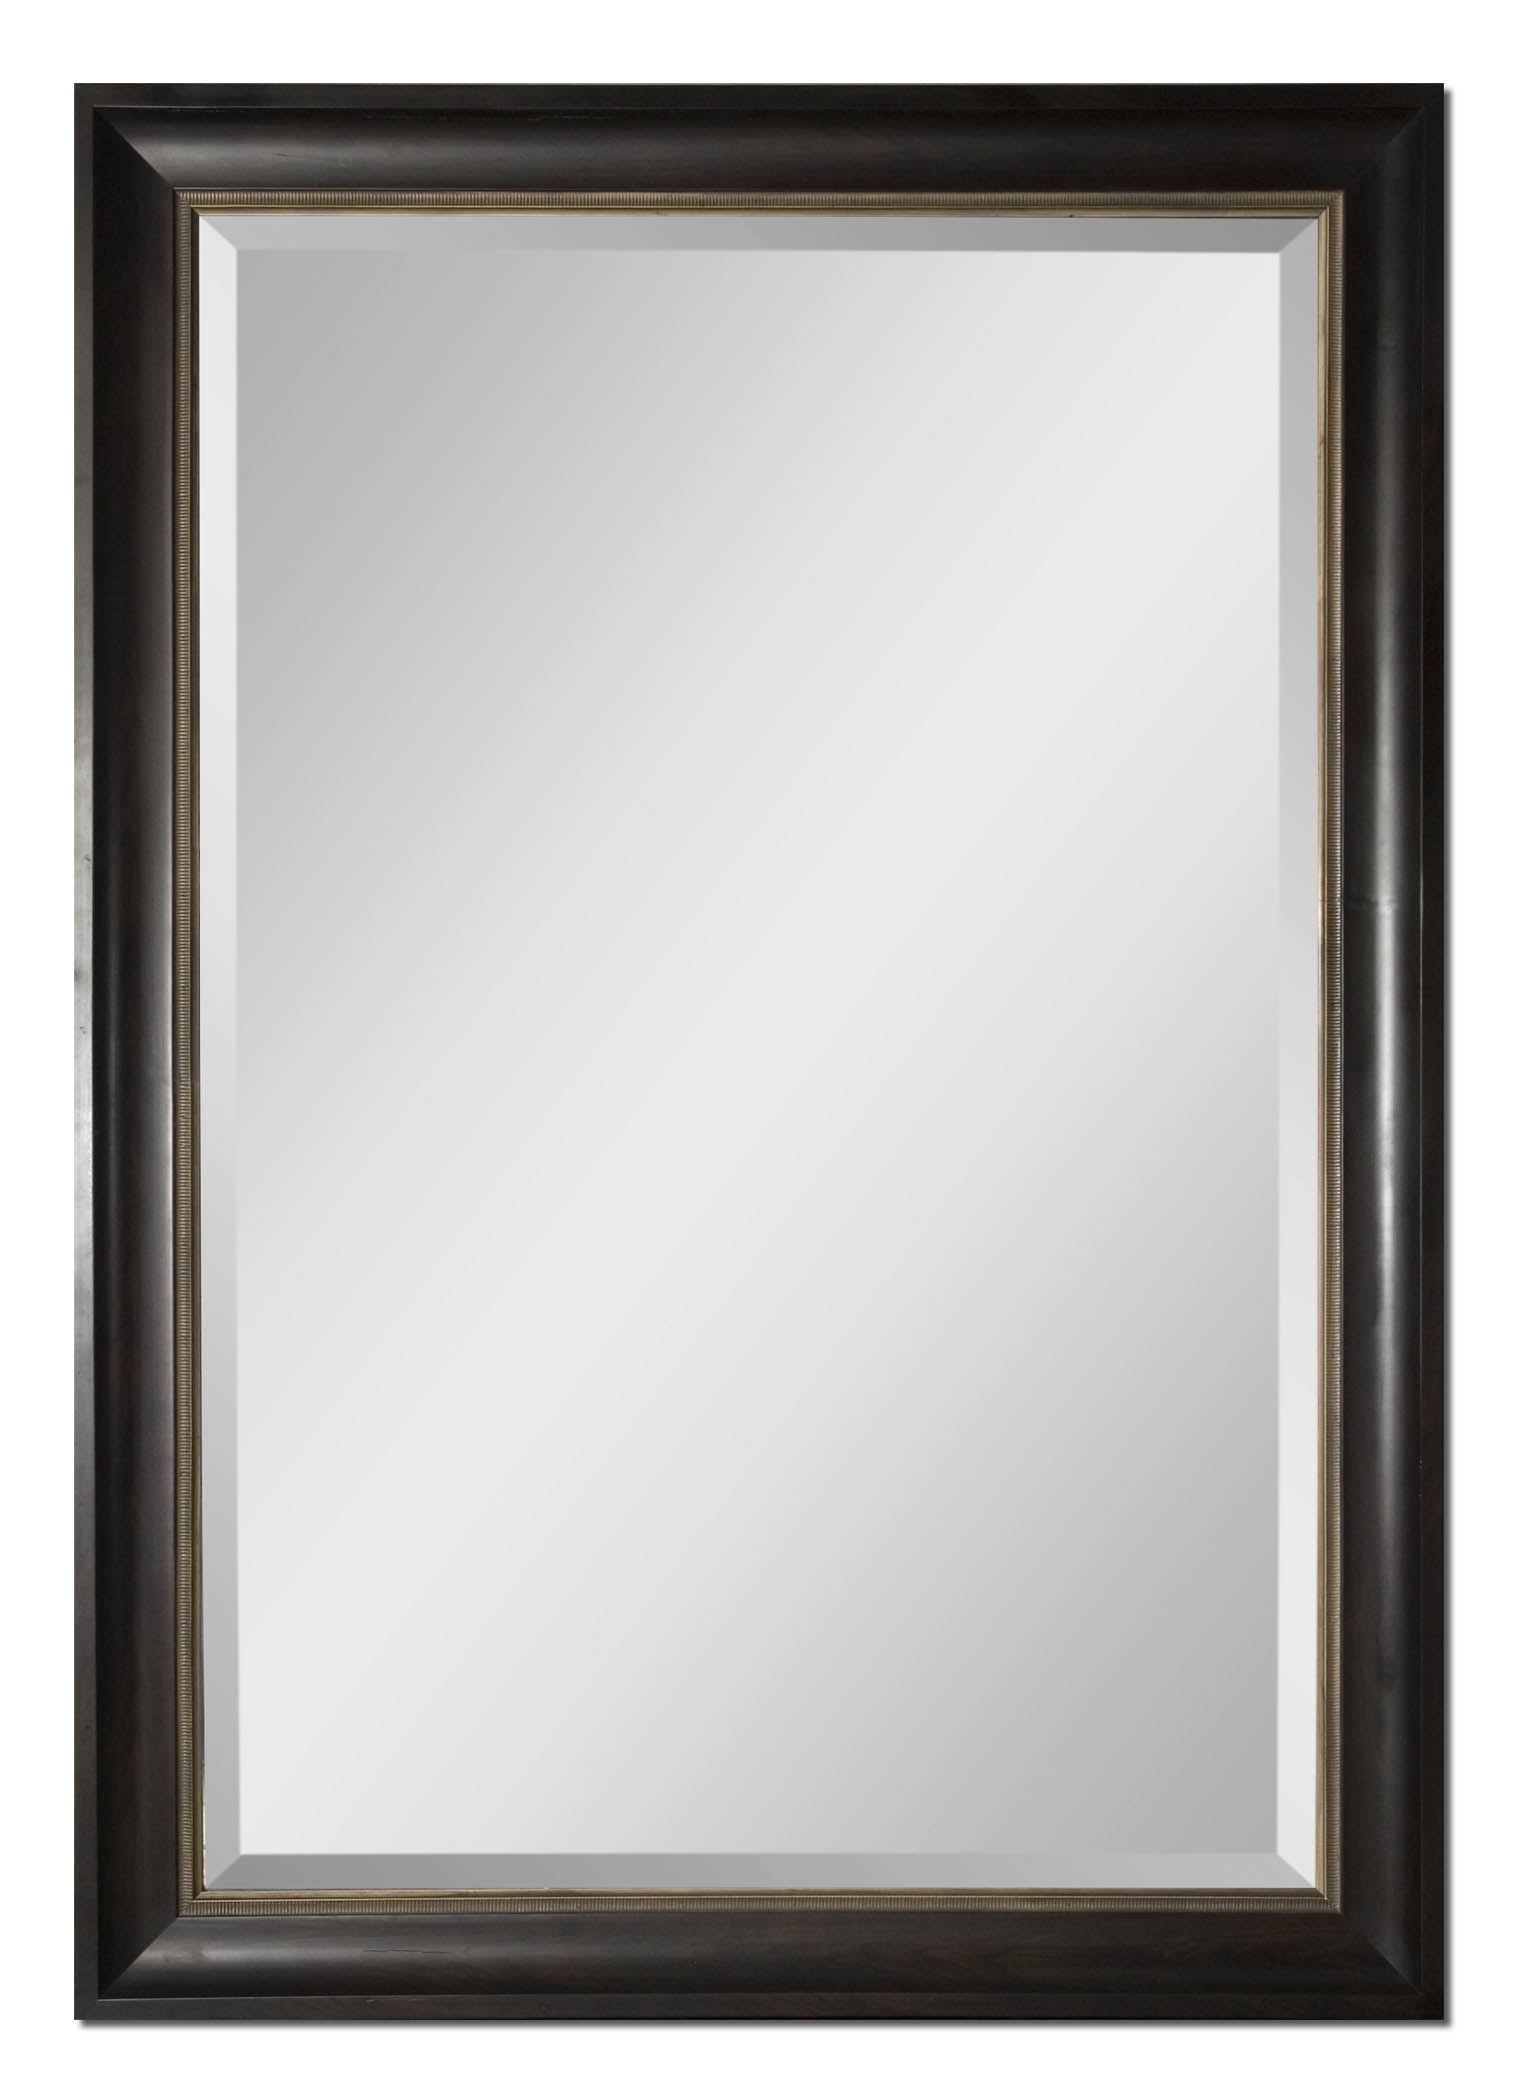 Axton Oversized Black Framed Mirroruttermost | Black Mirror Frame Inside Matte Black Square Wall Mirrors (View 8 of 15)